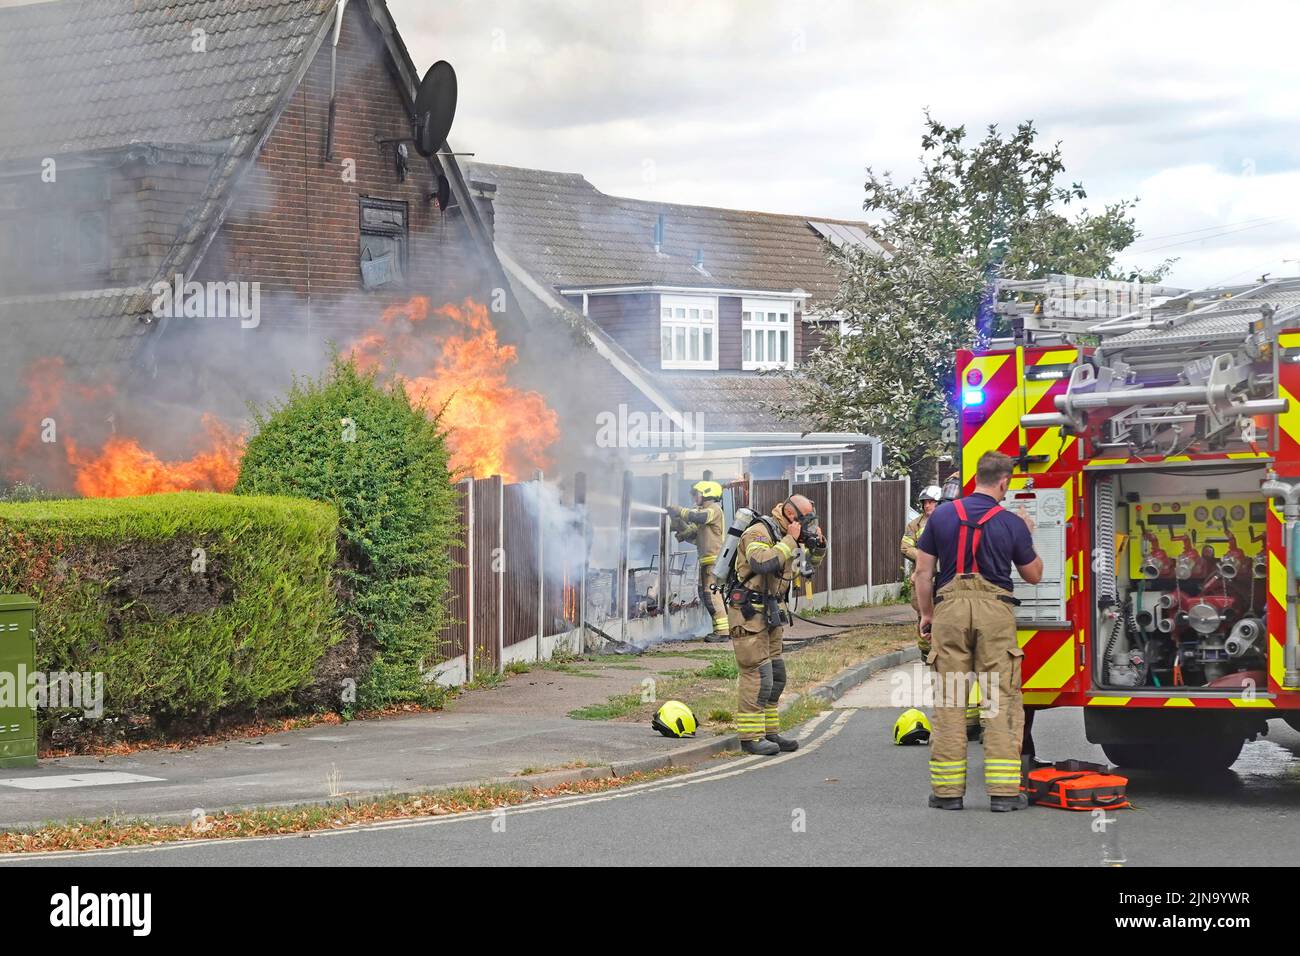 Essex Fire and Rescue services fire brigade firemen at house fire  firefighters in protective clothing start work on flames beside fire engine  UK Stock Photo